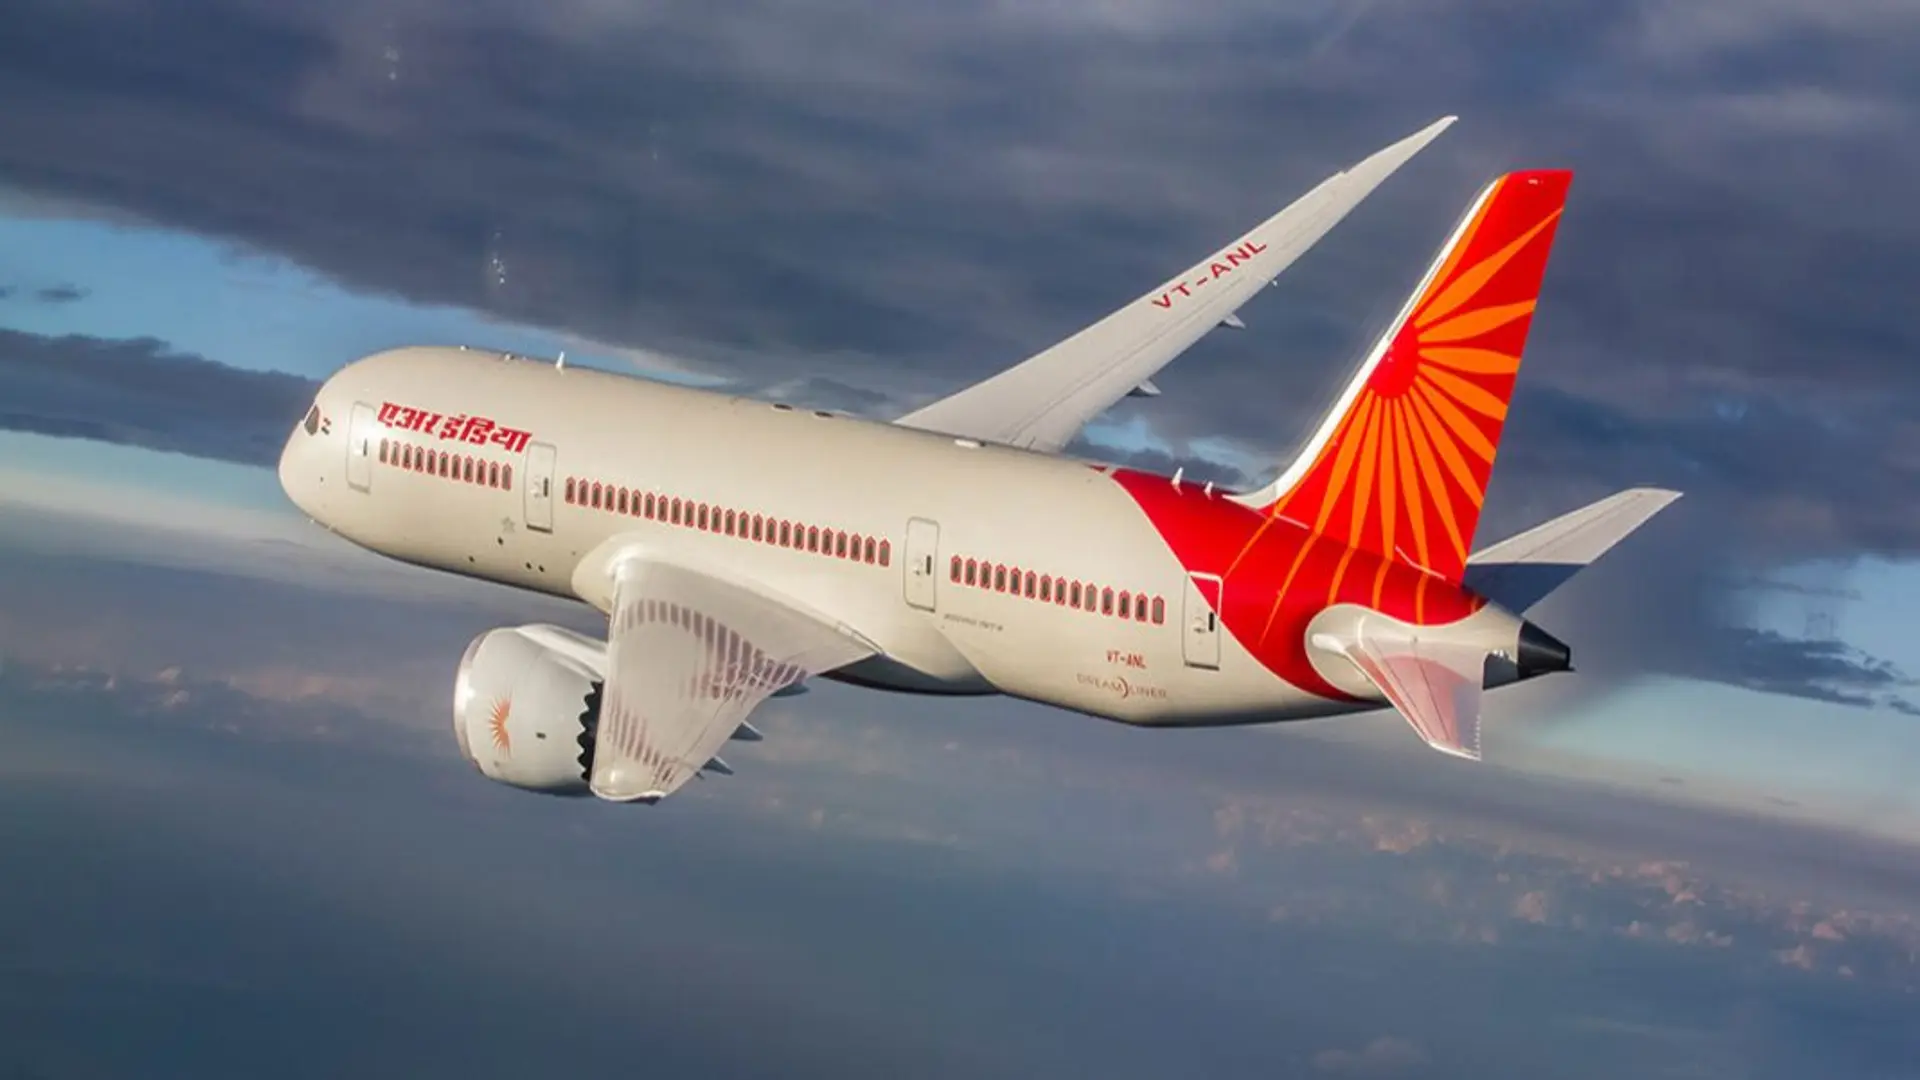 Air india's plane in the sky